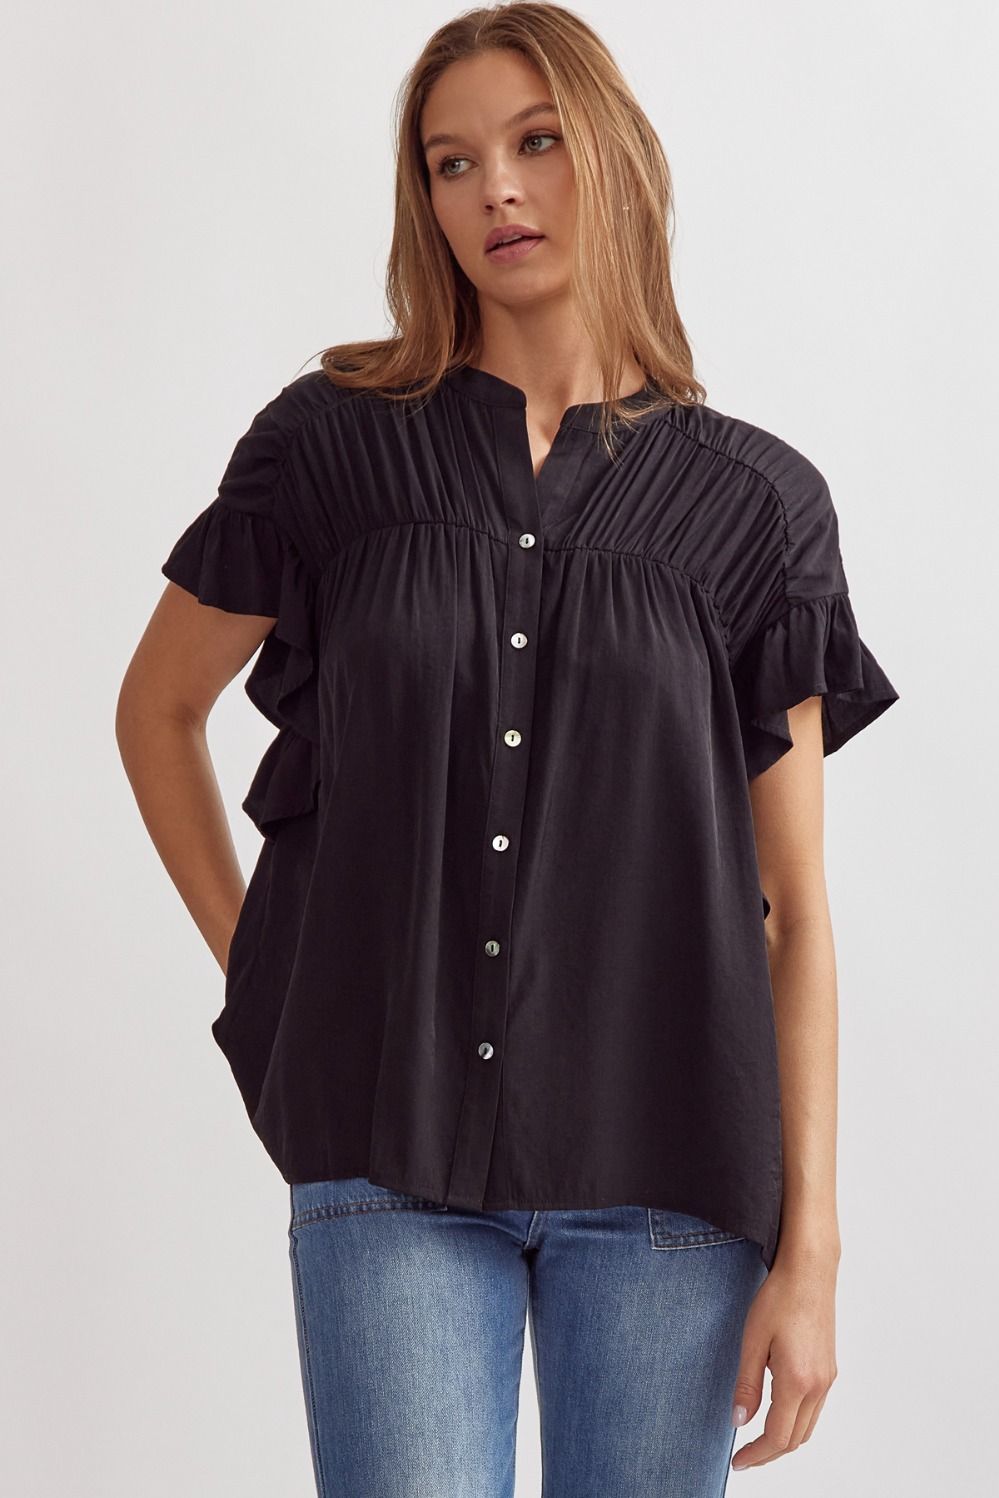 Ruffled Button Up Top